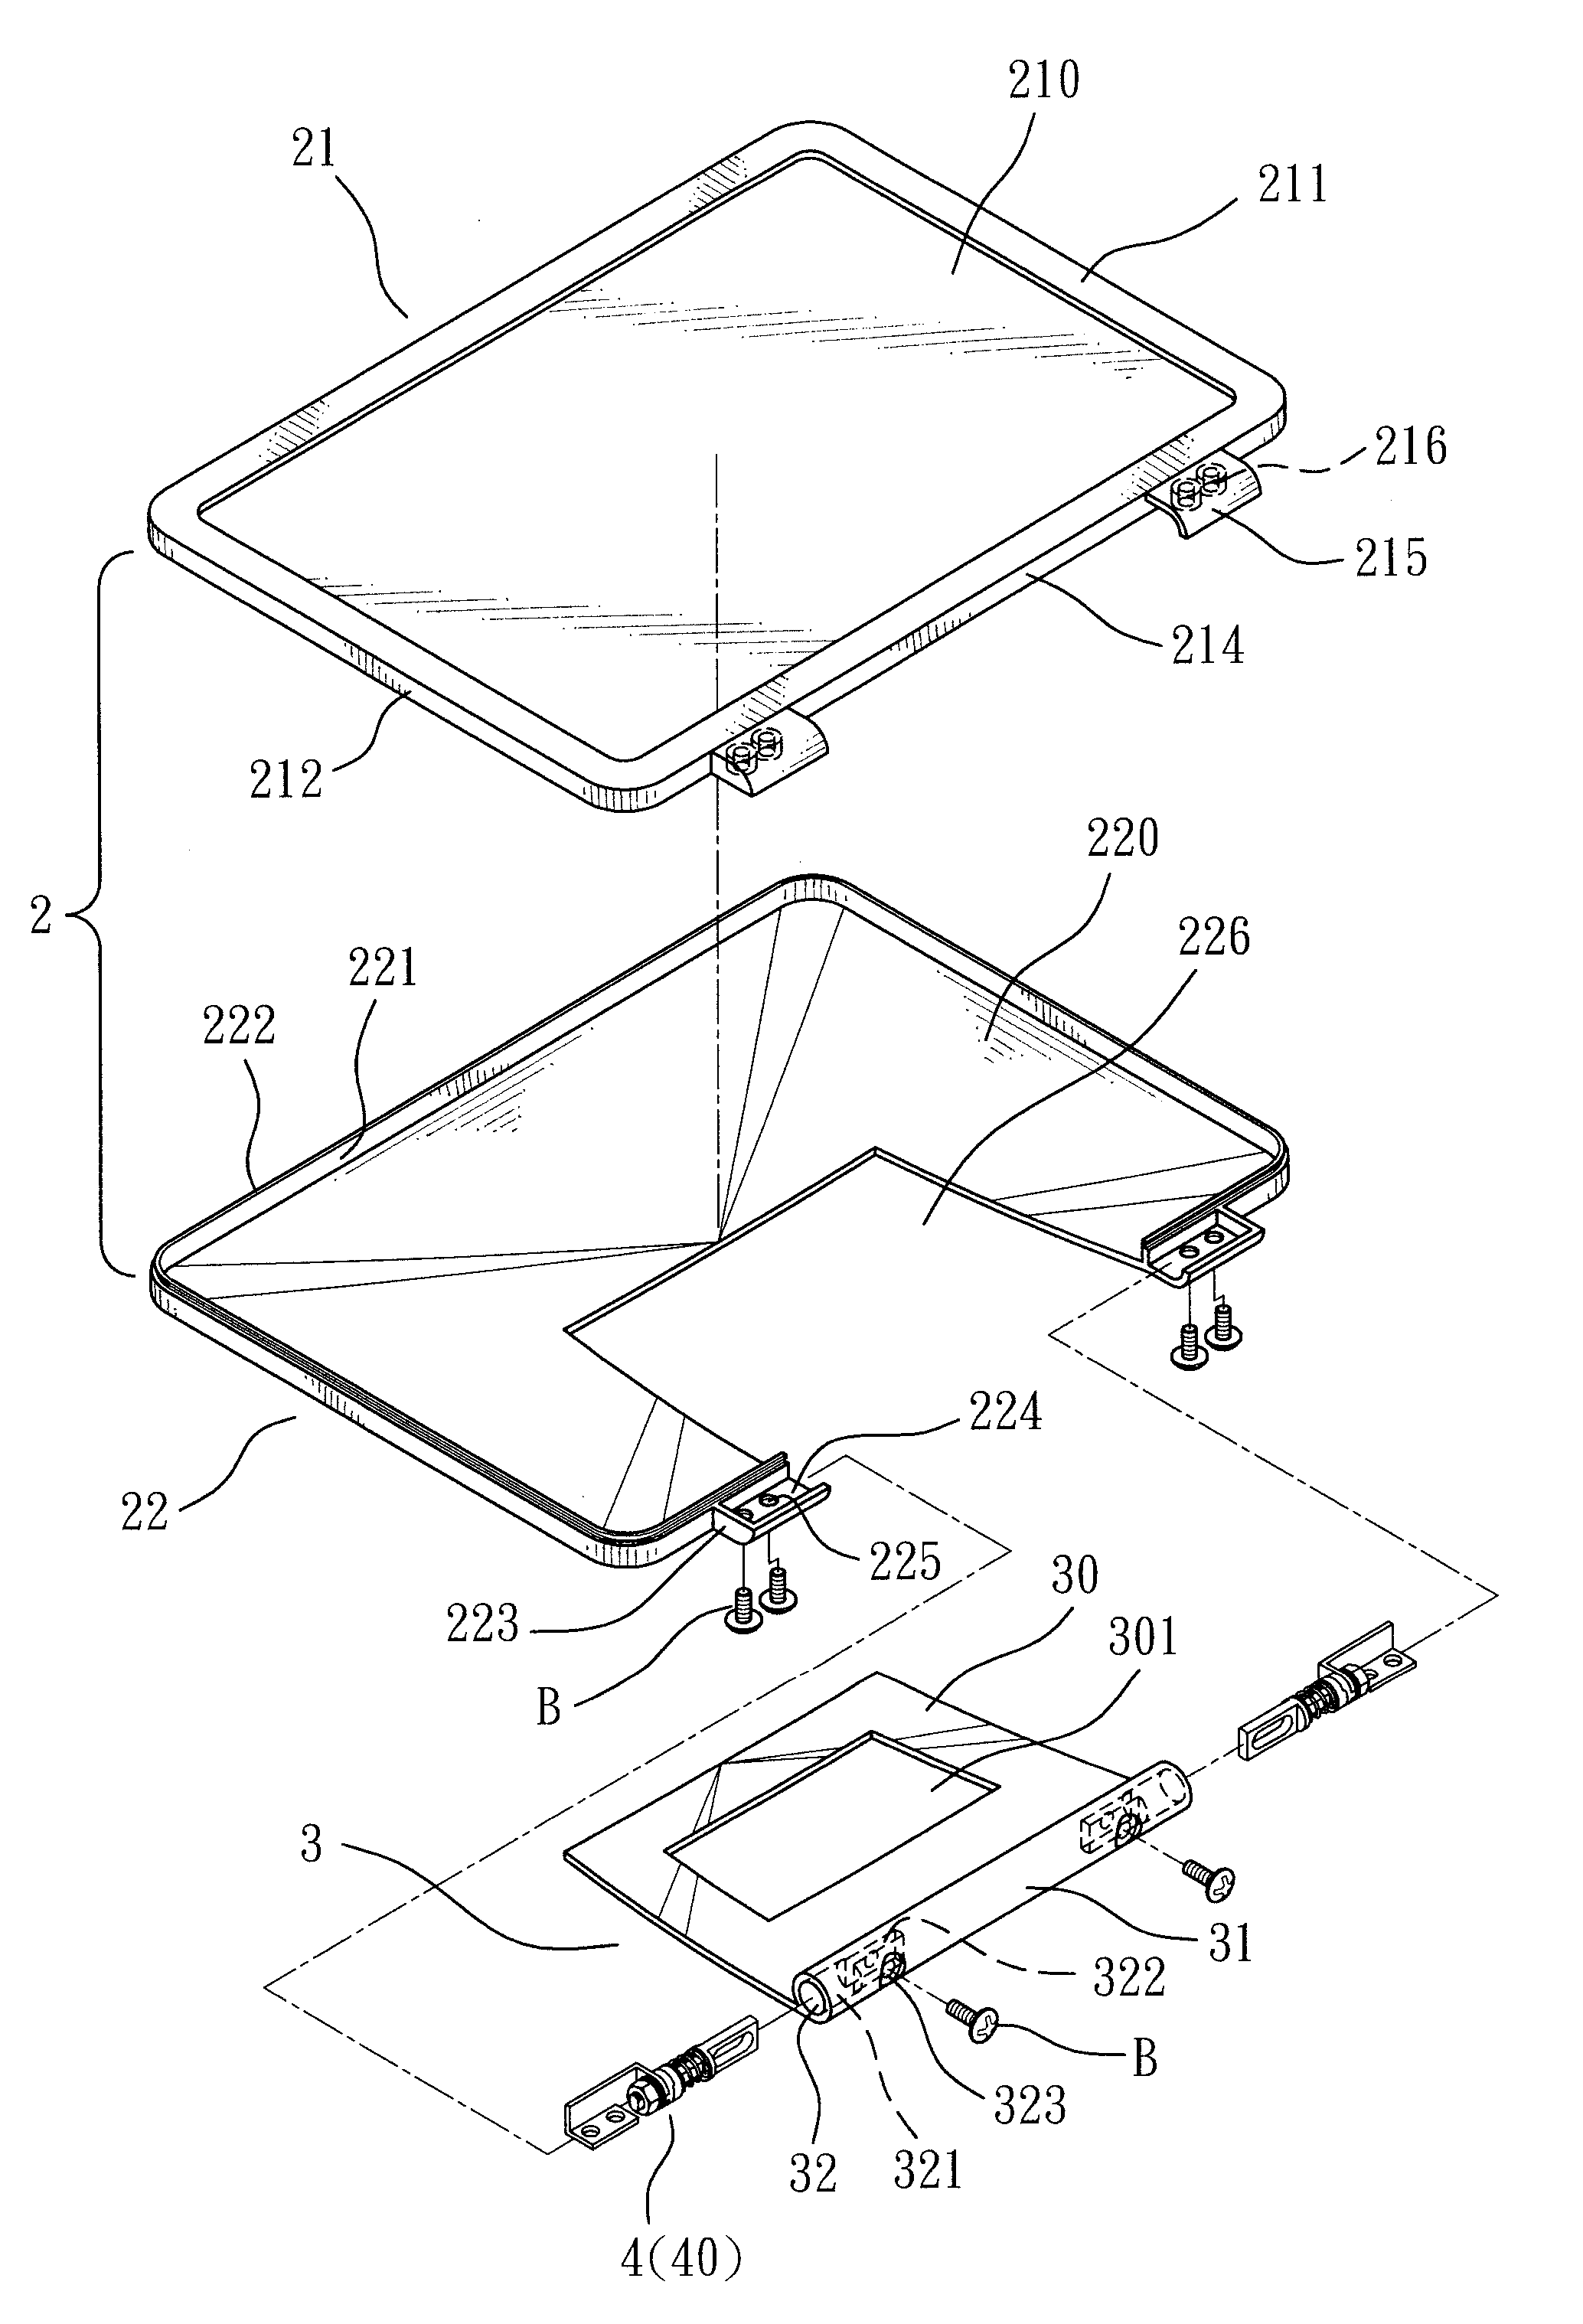 Protective cover support rack for portable electronic devices